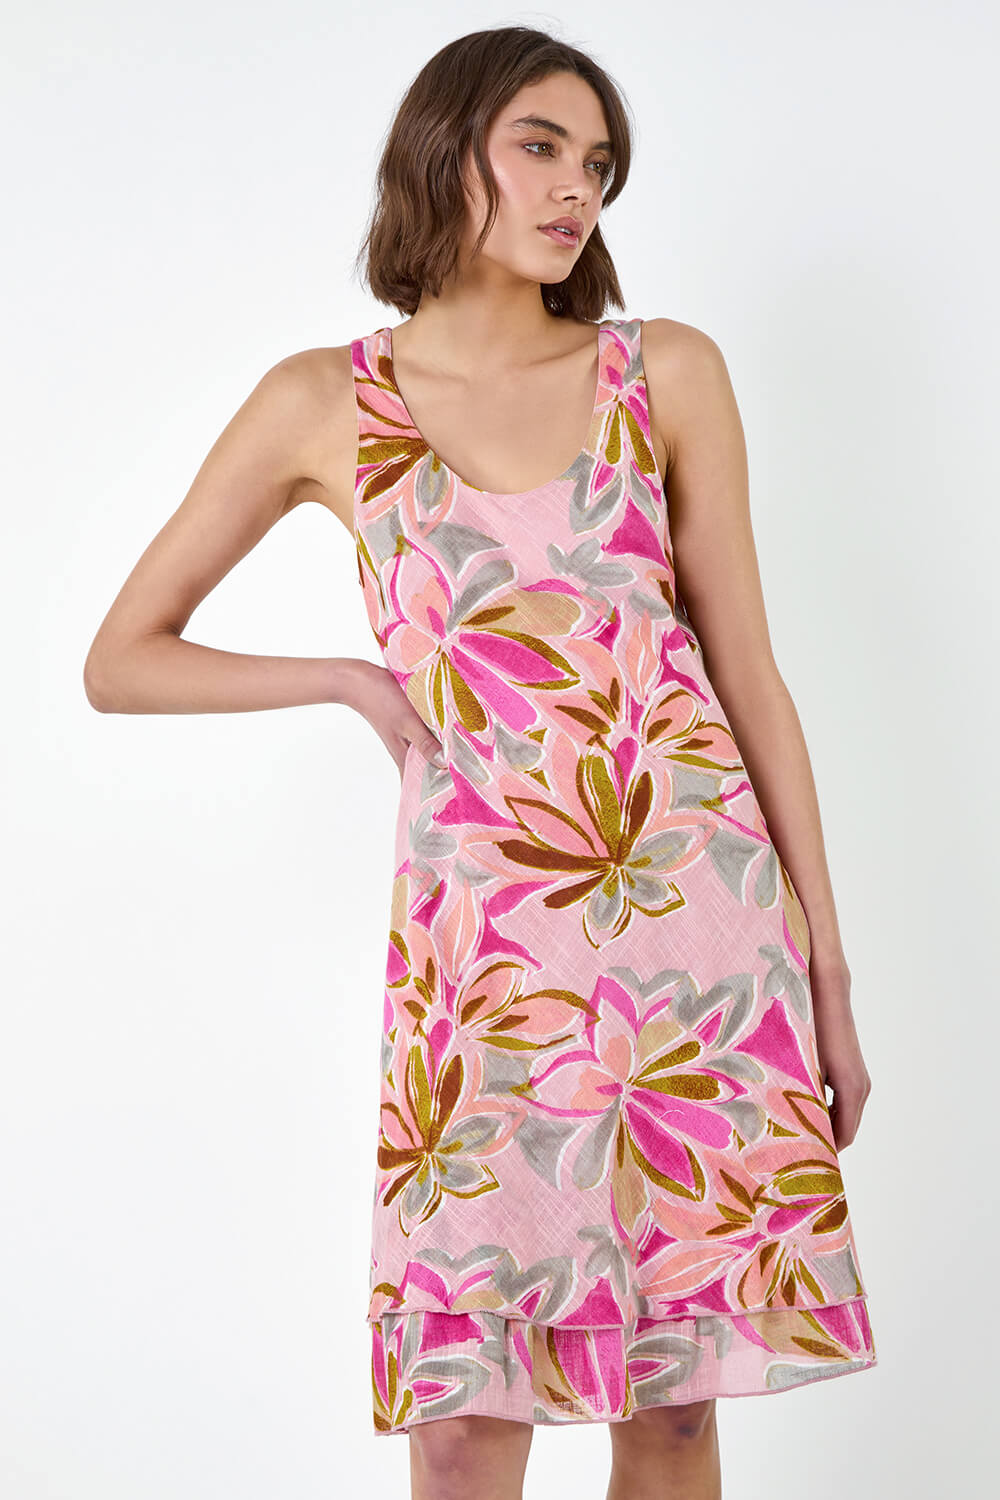 PINK Floral Print Cotton Layered Dress, Image 2 of 5